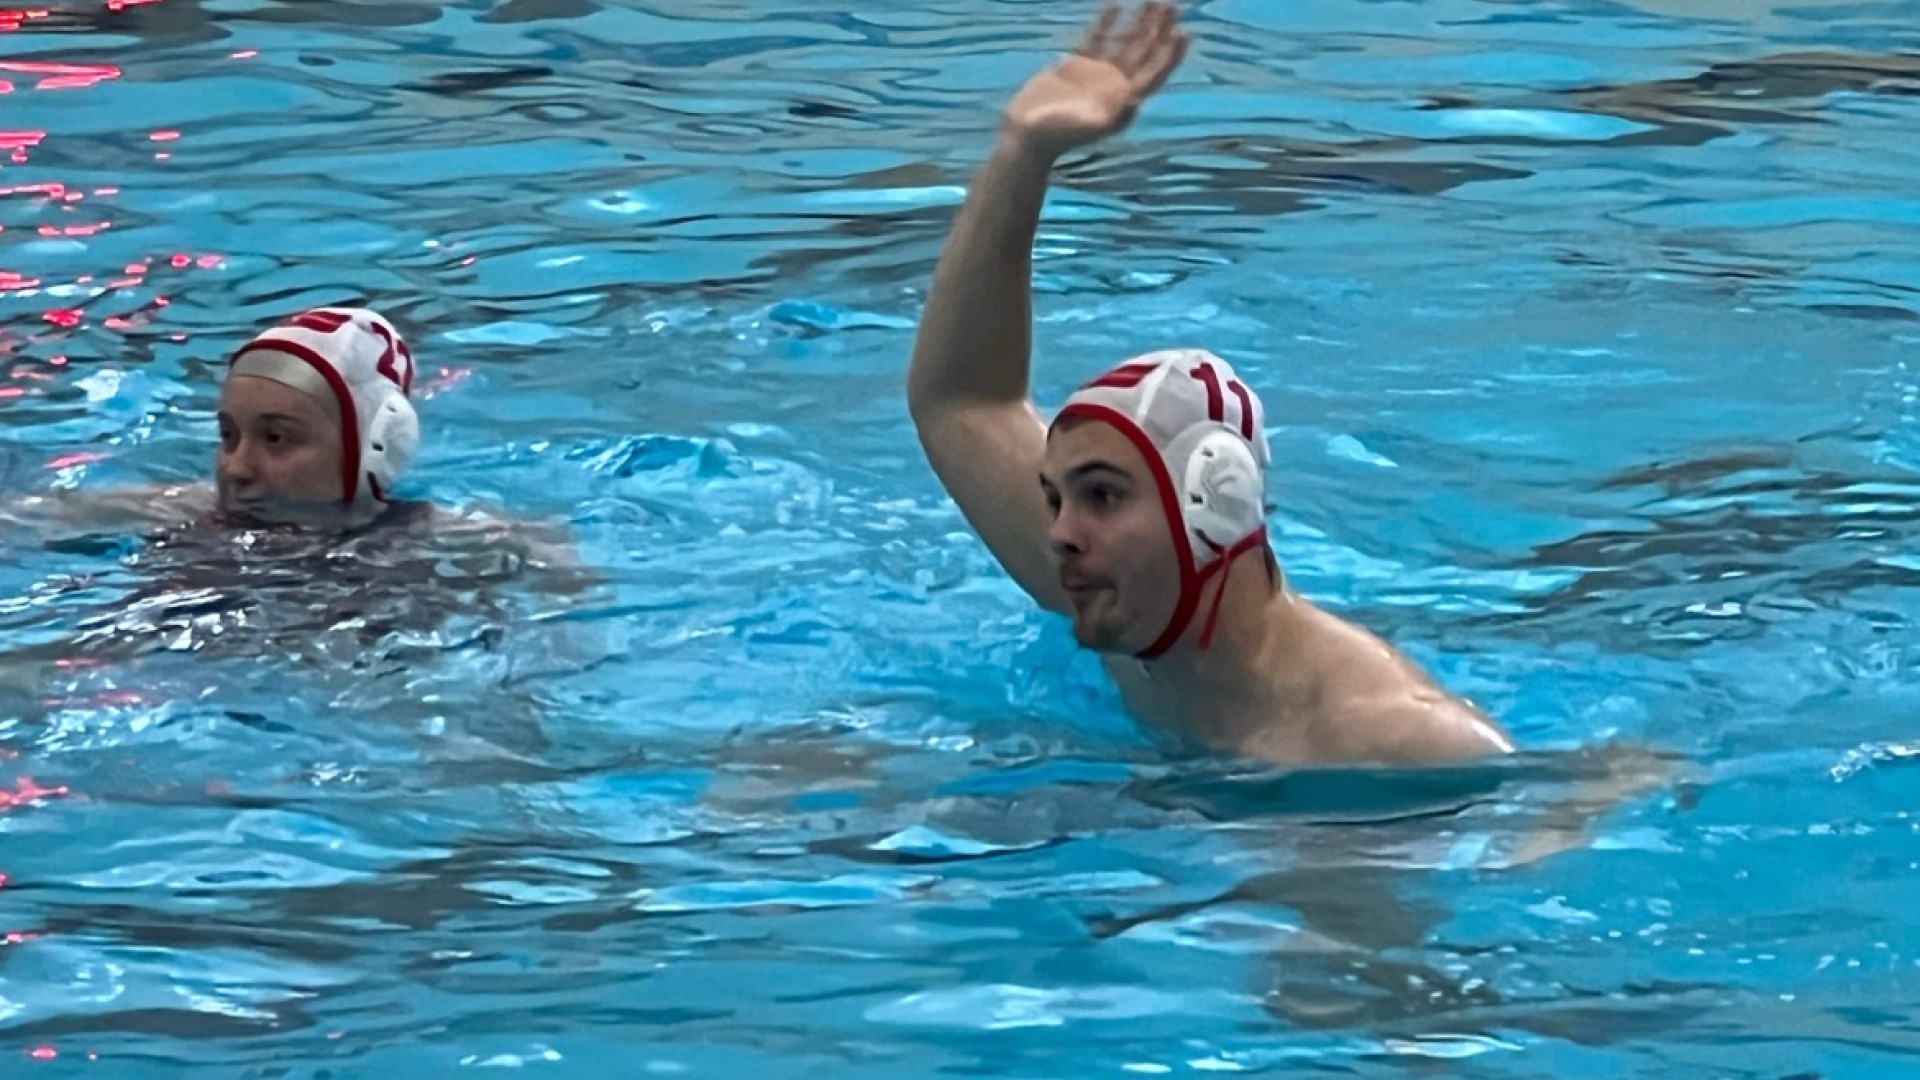 Me in a swimming pool, raised hand to catch the ball for water polo